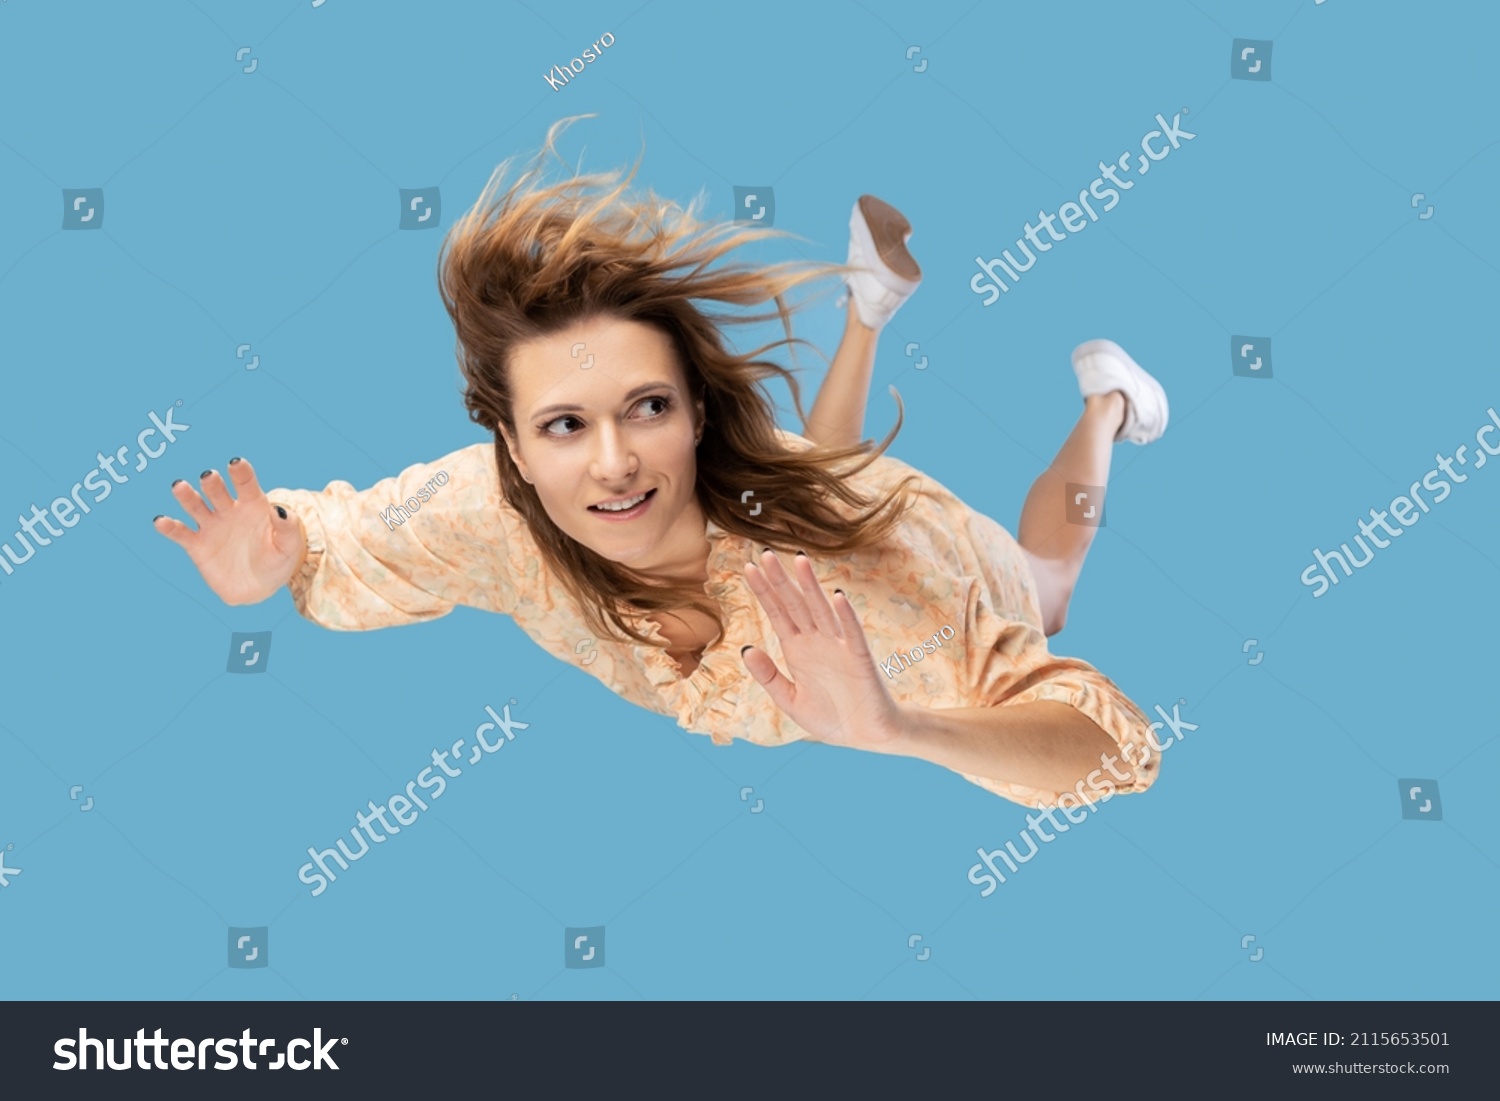 Beautiful young woman levitating in mid-air, falling down and her hair messed up soaring from wind, model flying hovering with dreamy peaceful expression. indoor shot isolated on blue background #2115653501